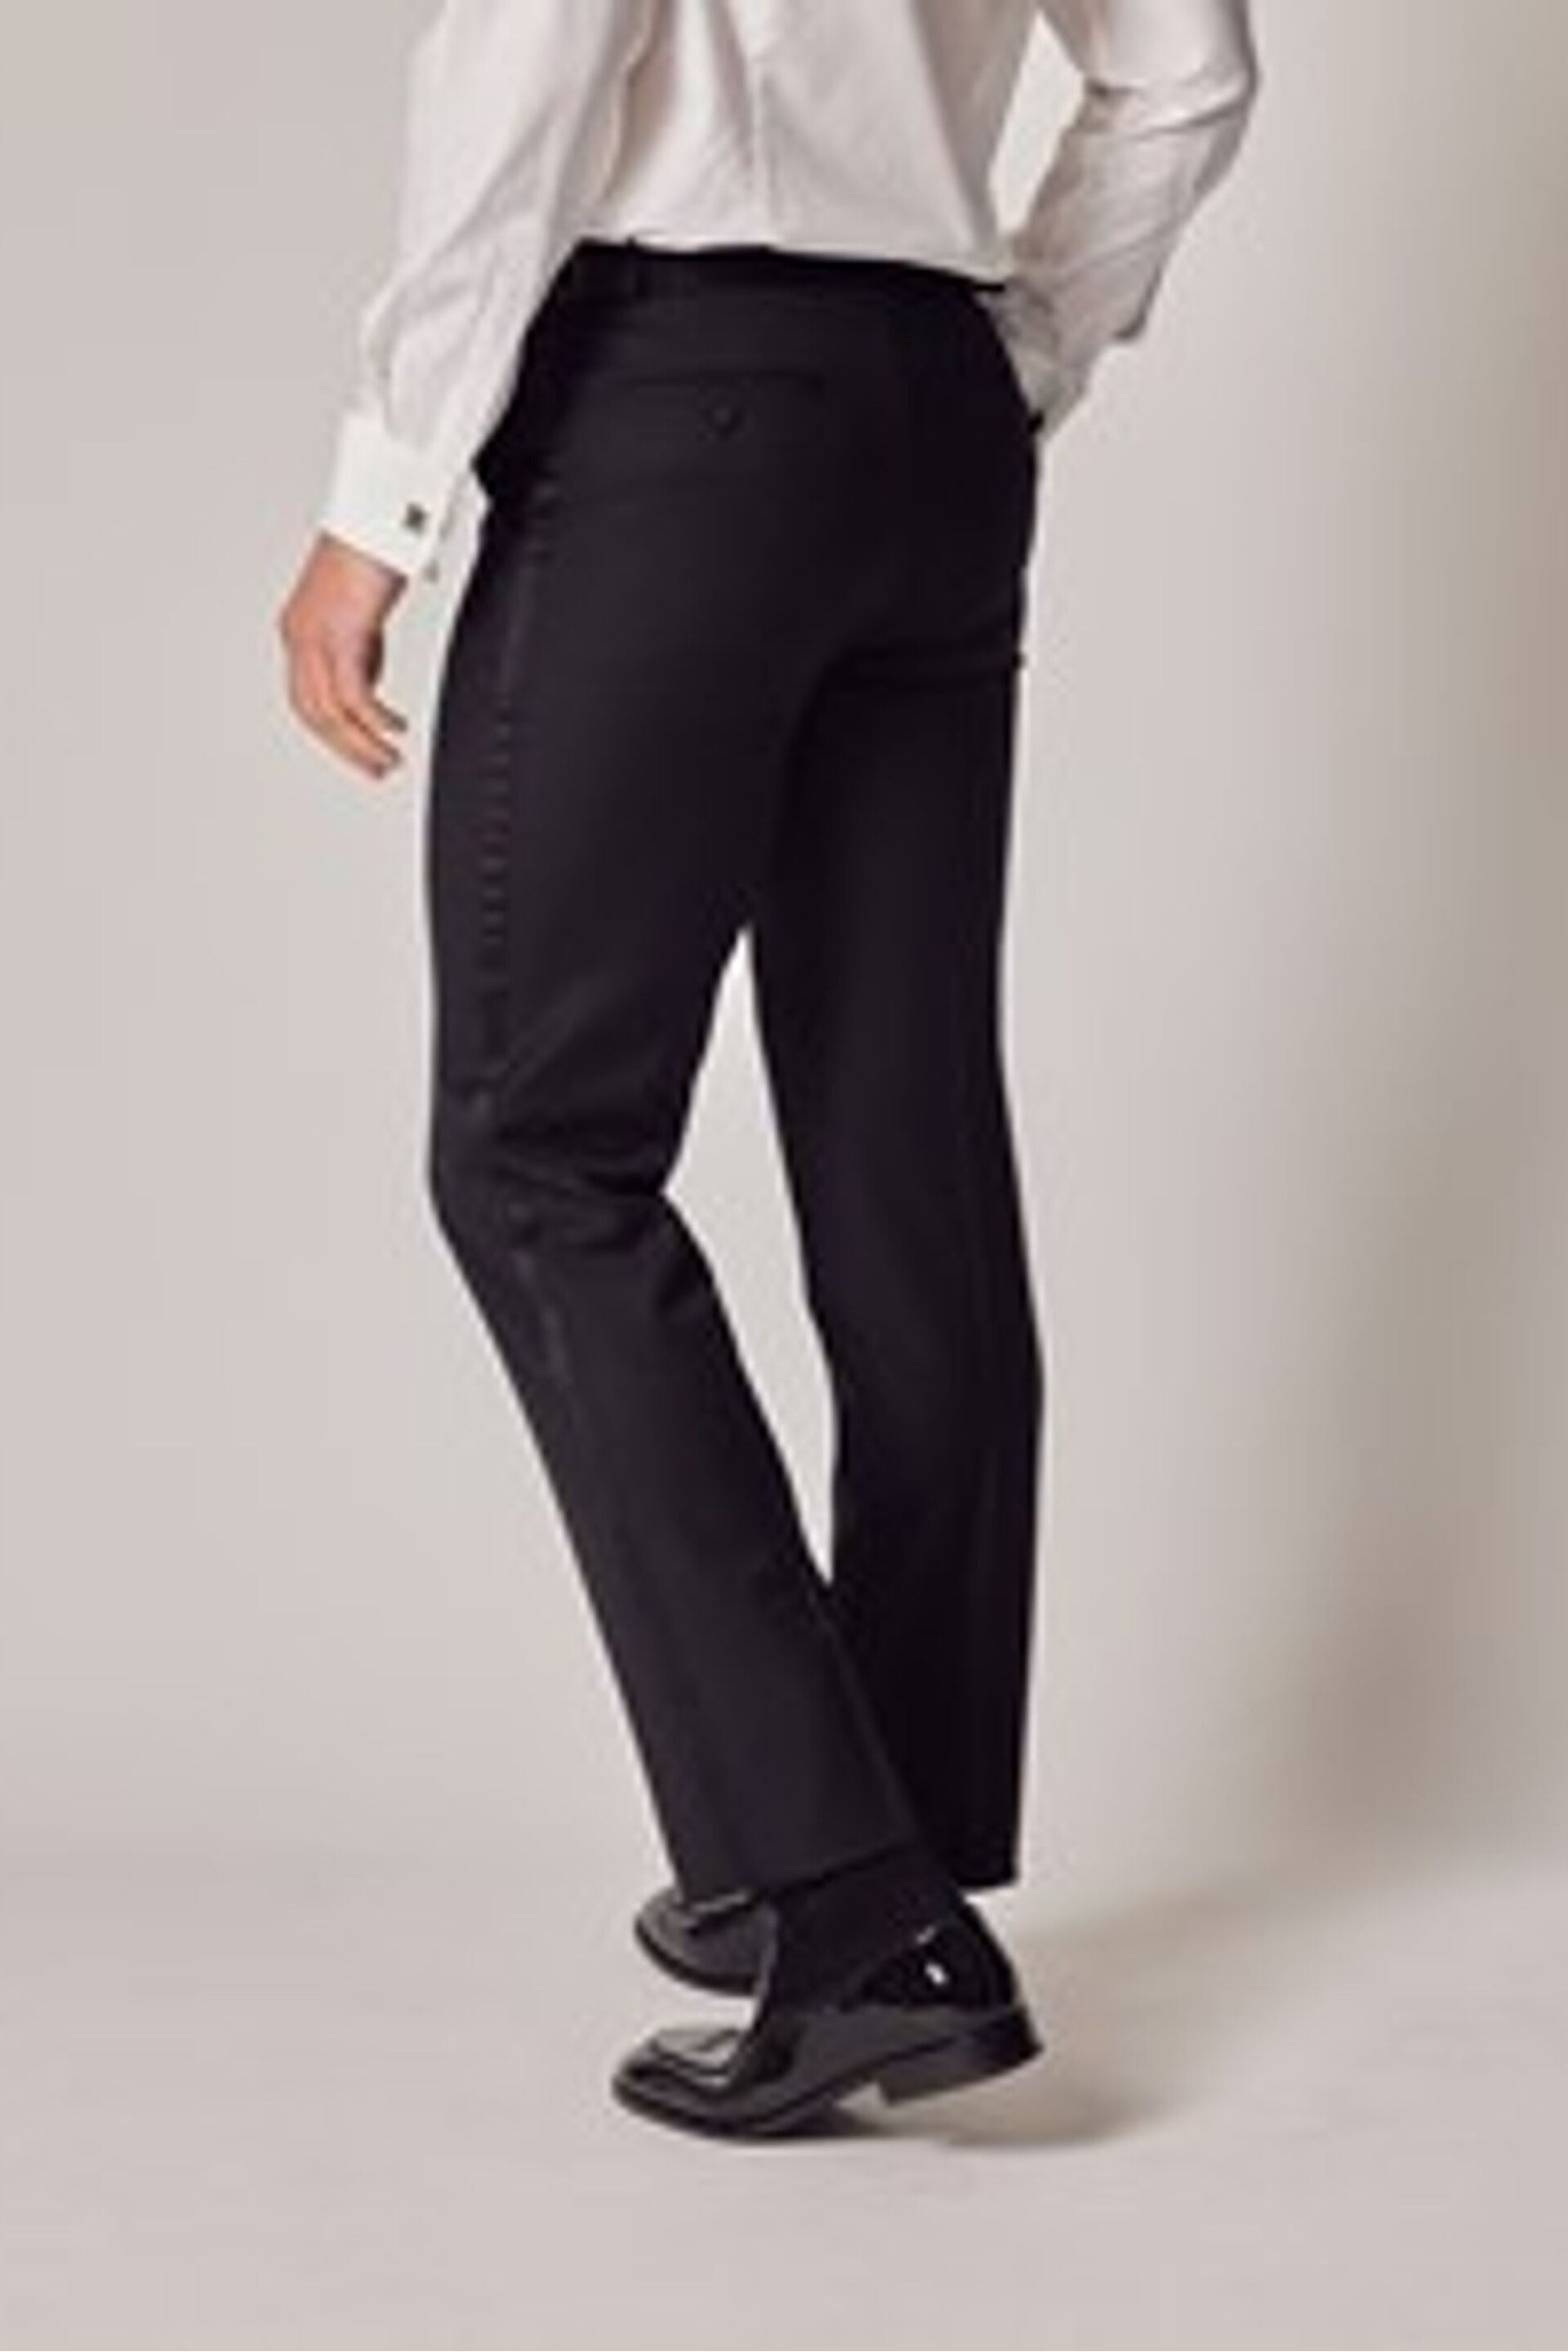 Hawes & Curtis Slim Dinner Suit Black Trousers With Side Adjusters - Image 2 of 4